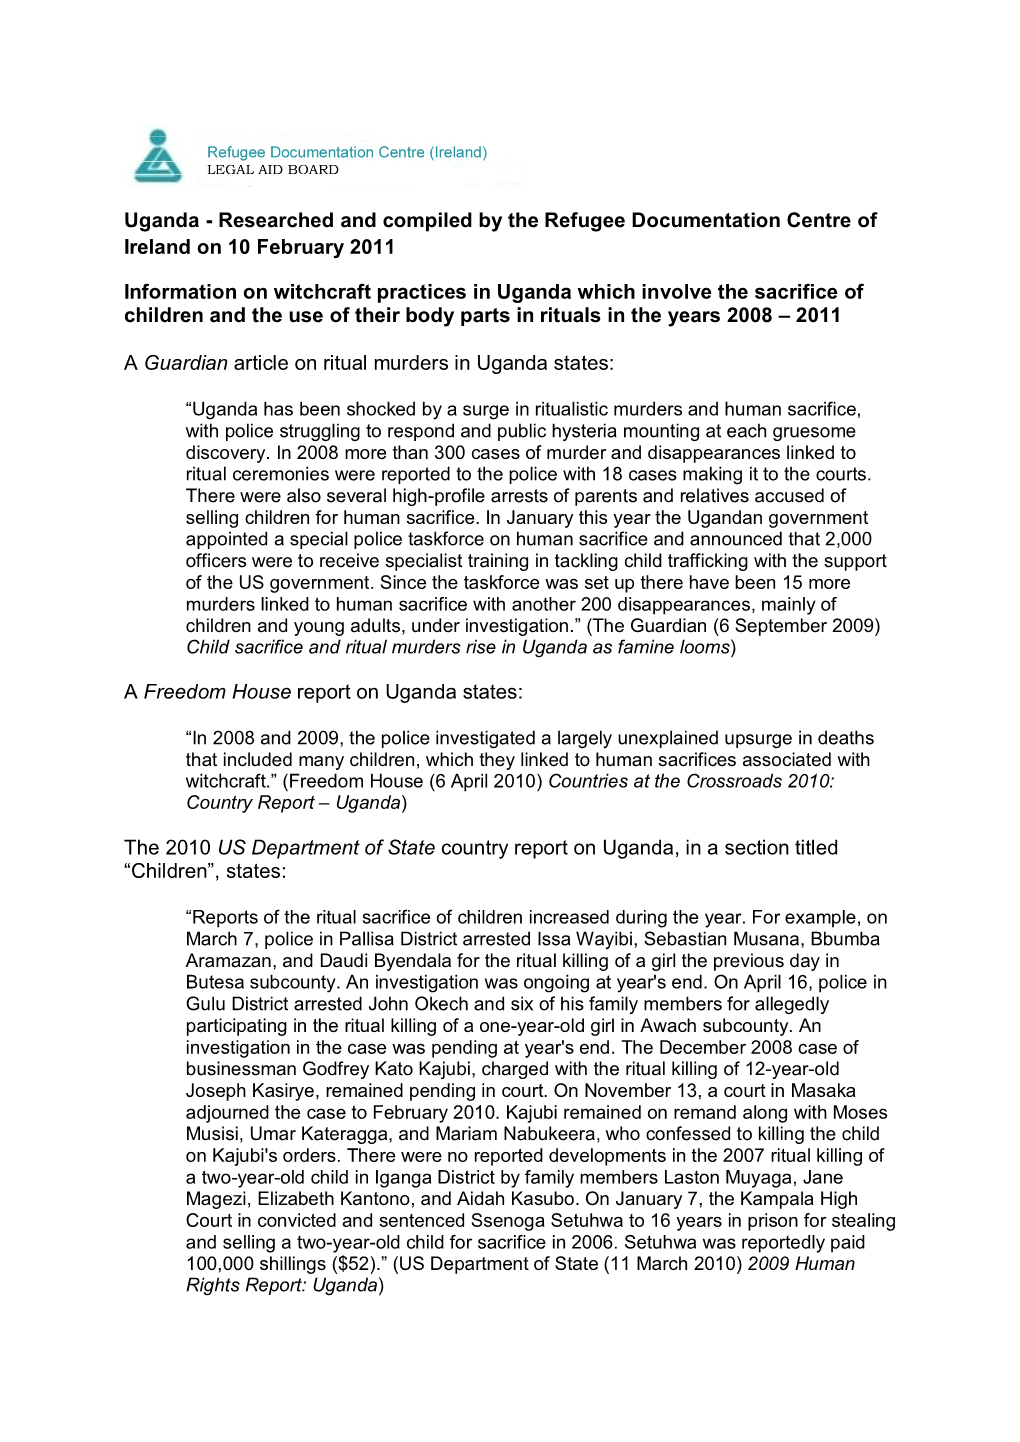 Uganda - Researched and Compiled by the Refugee Documentation Centre of Ireland on 10 February 2011